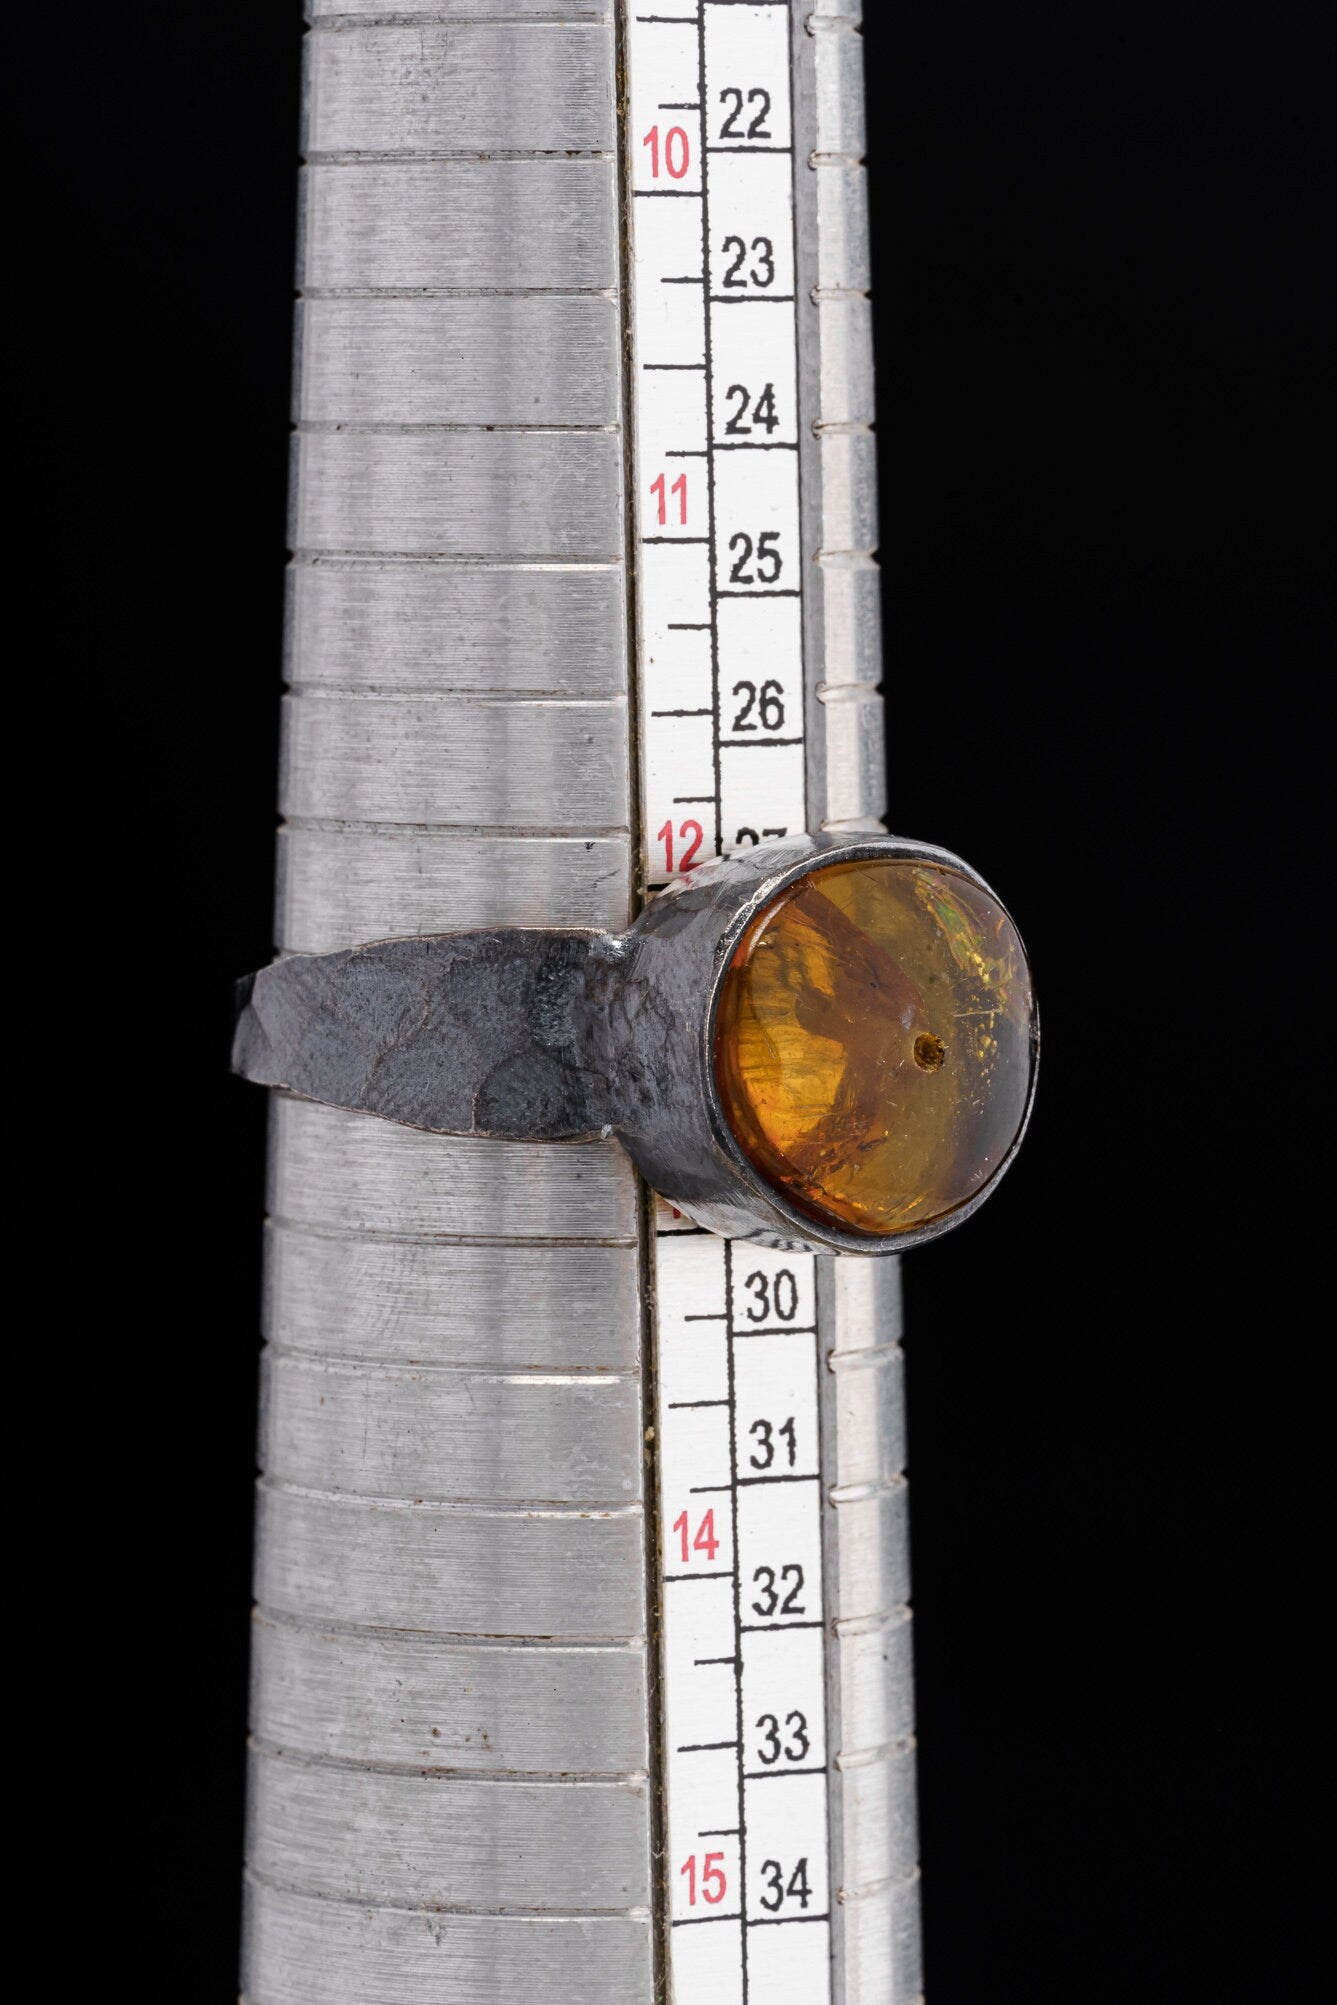 Oval Mexican Amber Bead - Unisex / Men - Large Crystal Ring - Size 12 3/4 US - 925 Sterling Silver - Hammer Textured & Oxidised